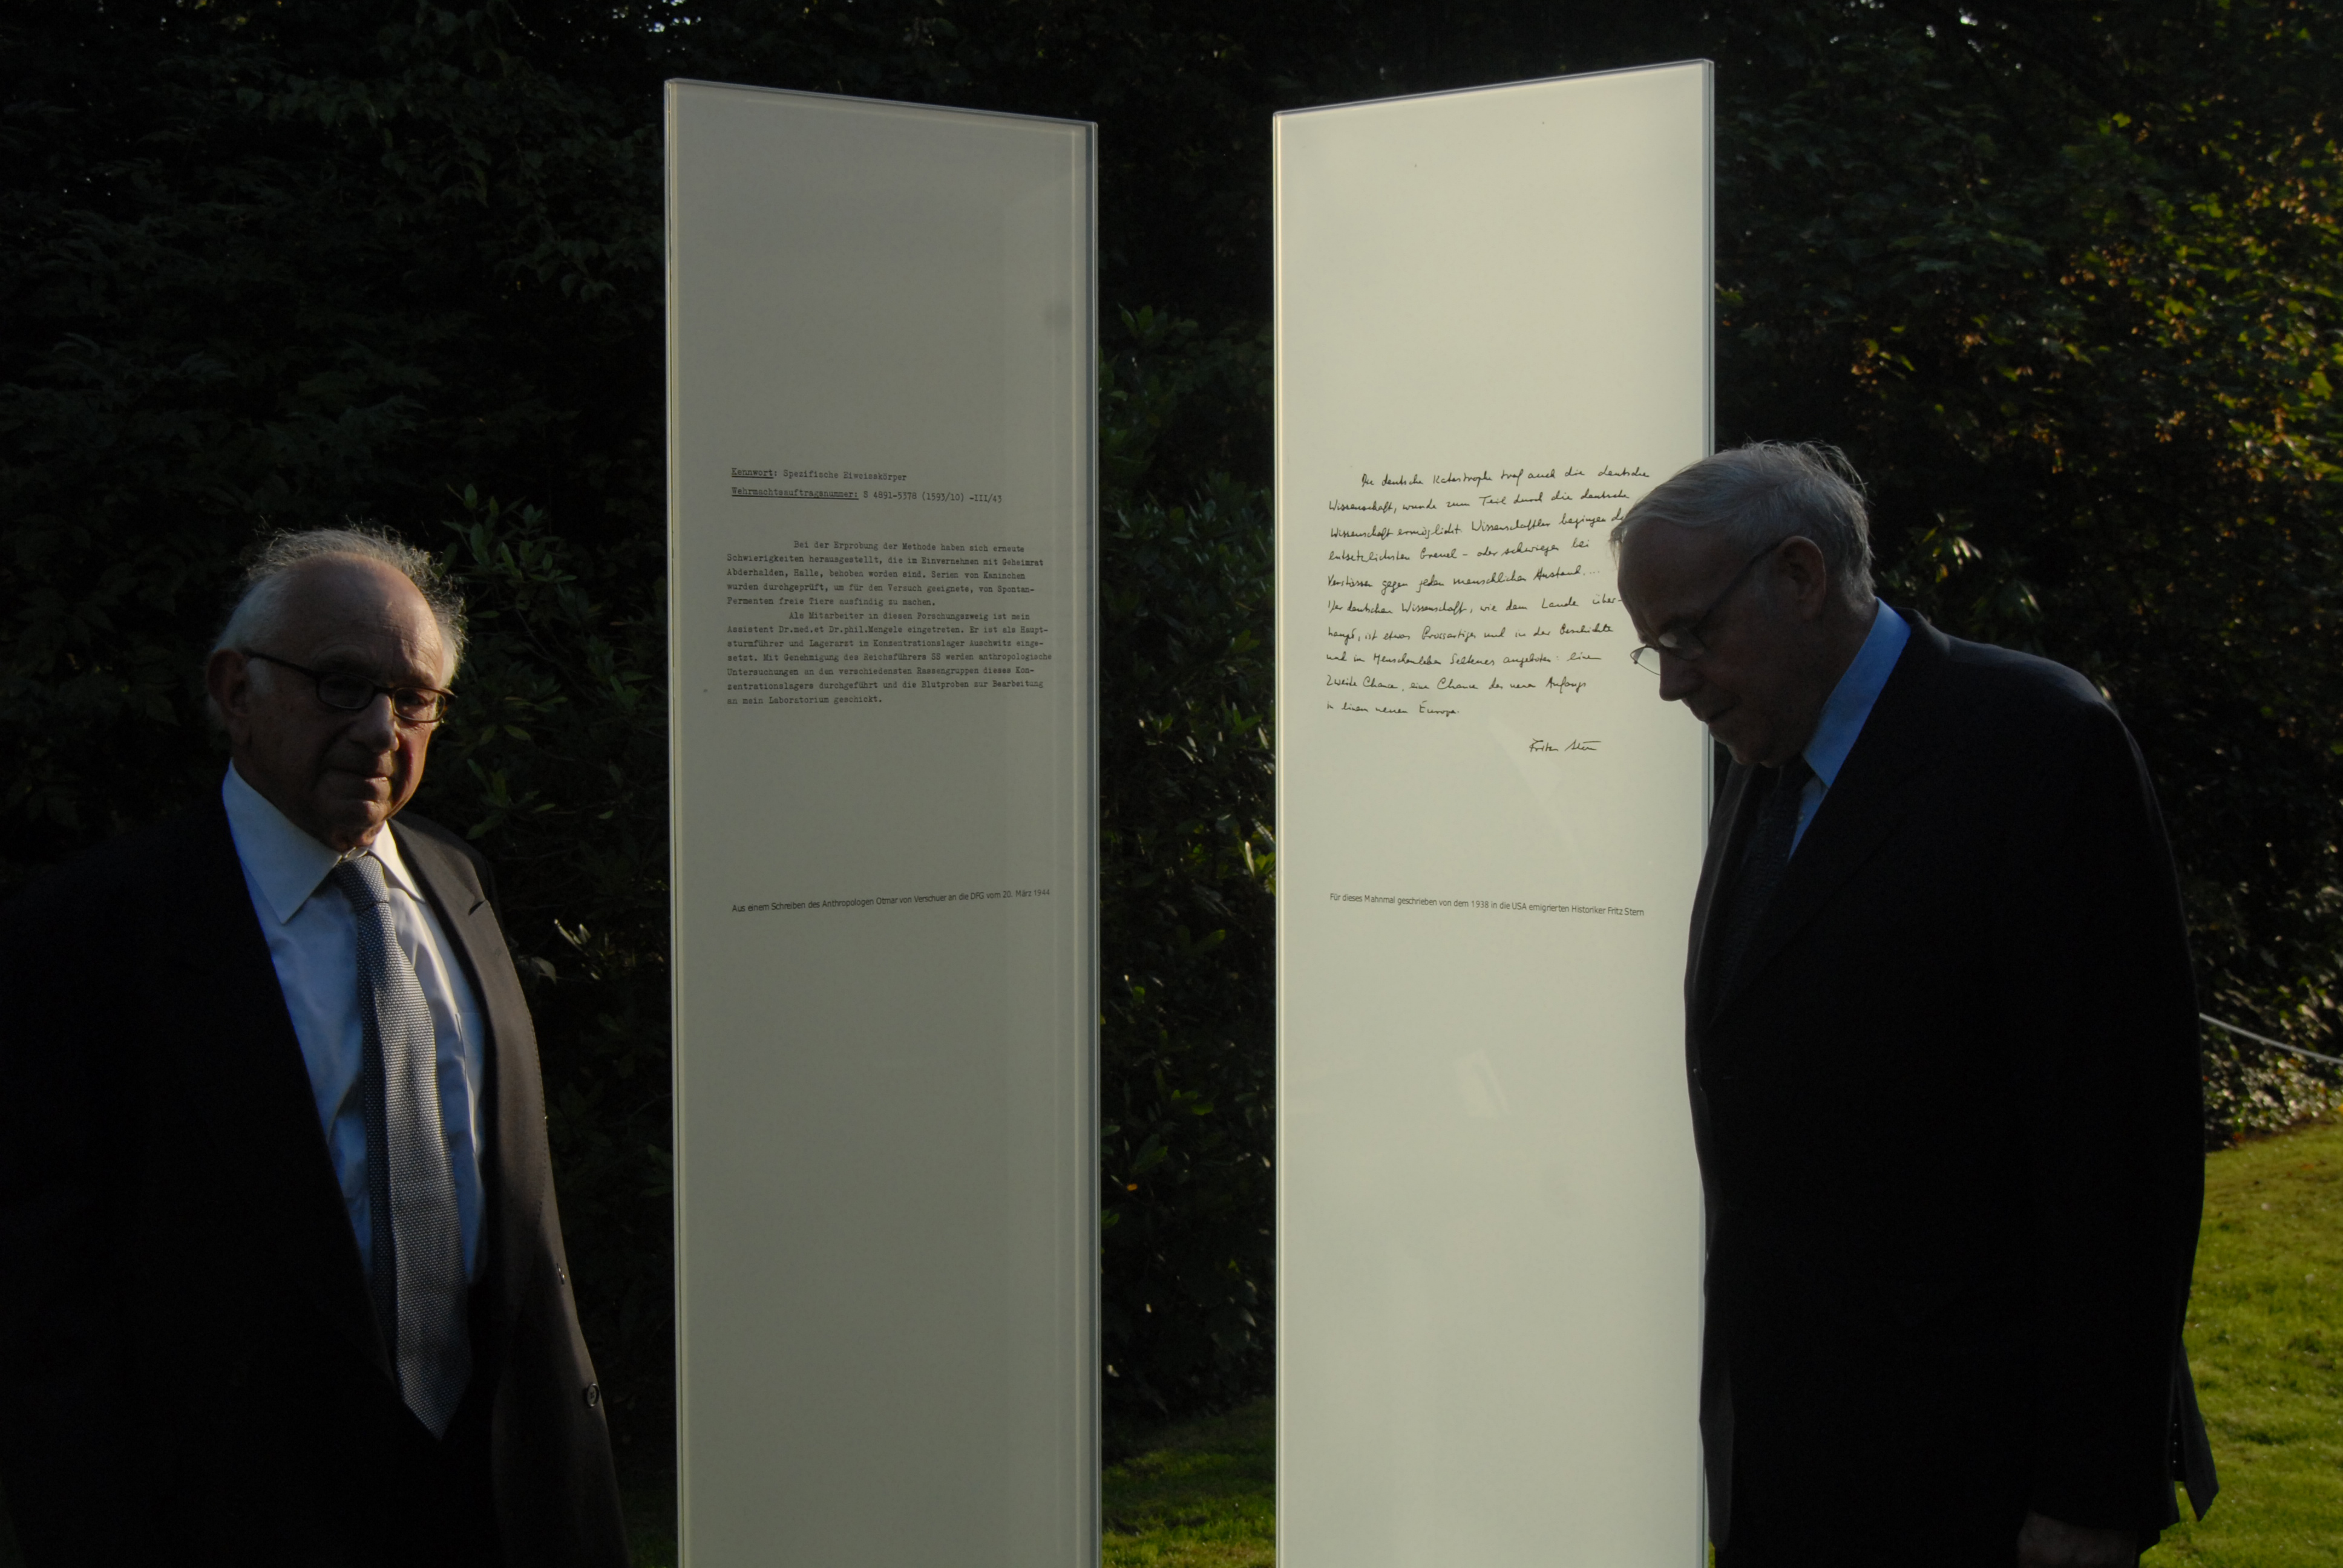 Fritz Stern and Ernst-Ludwig Winnacker in front of the memorial